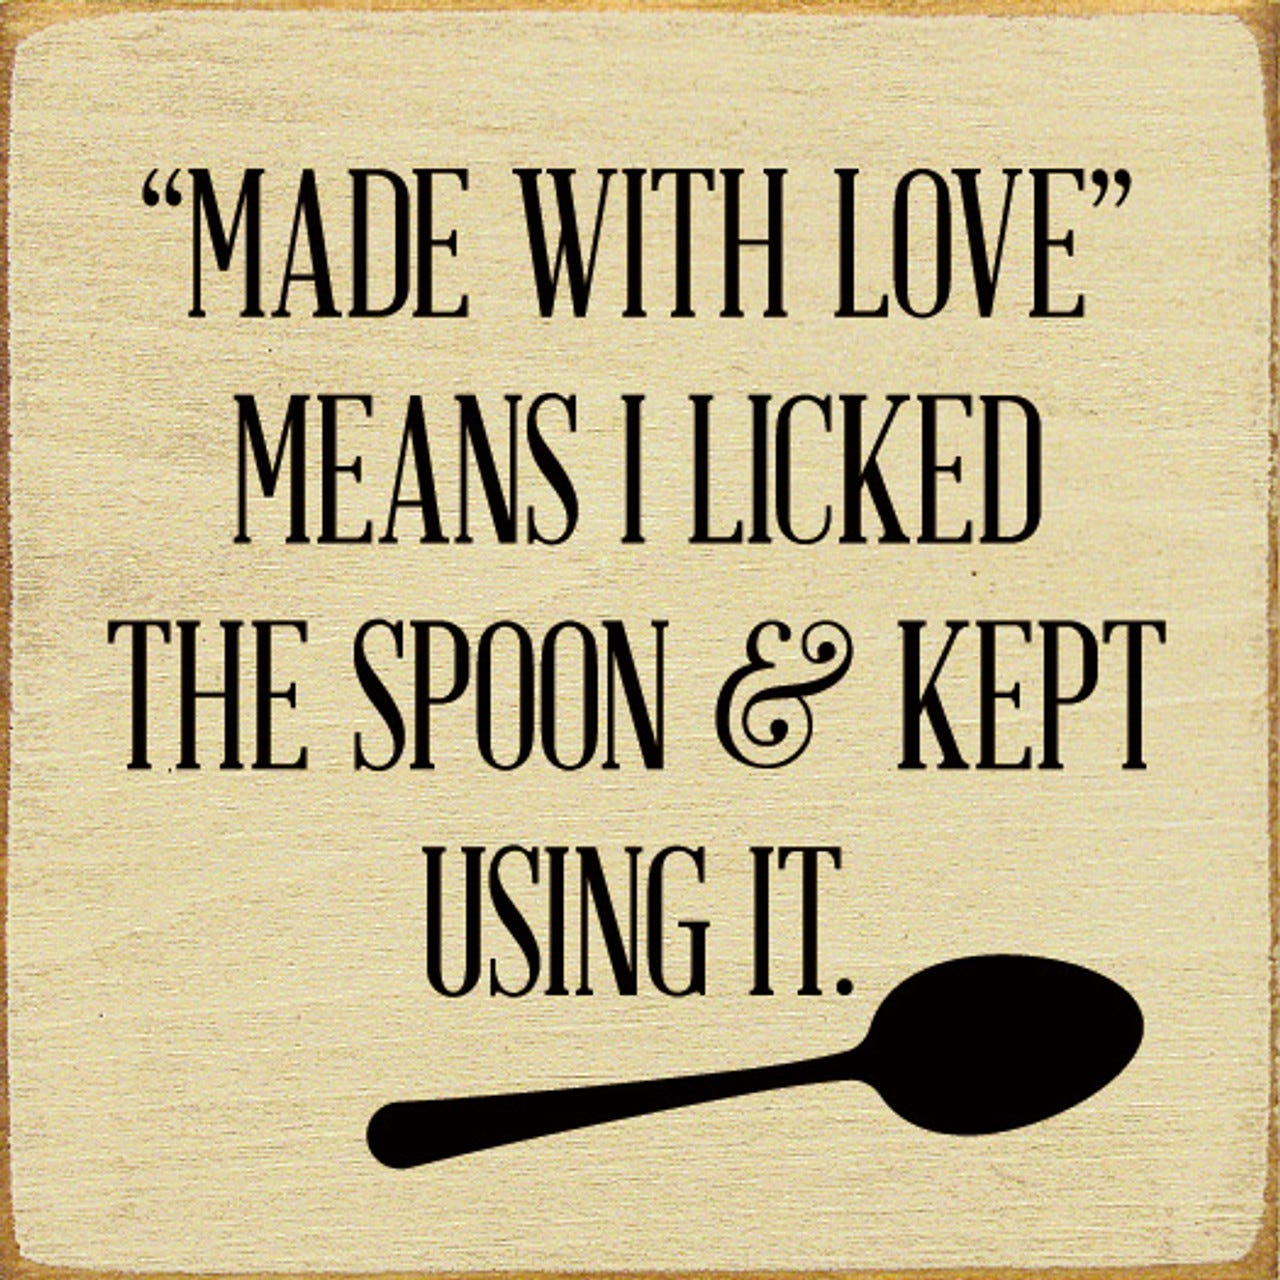 Made With Love" Means I Licked The Spoon & Kept Using It. | Wood Signs for